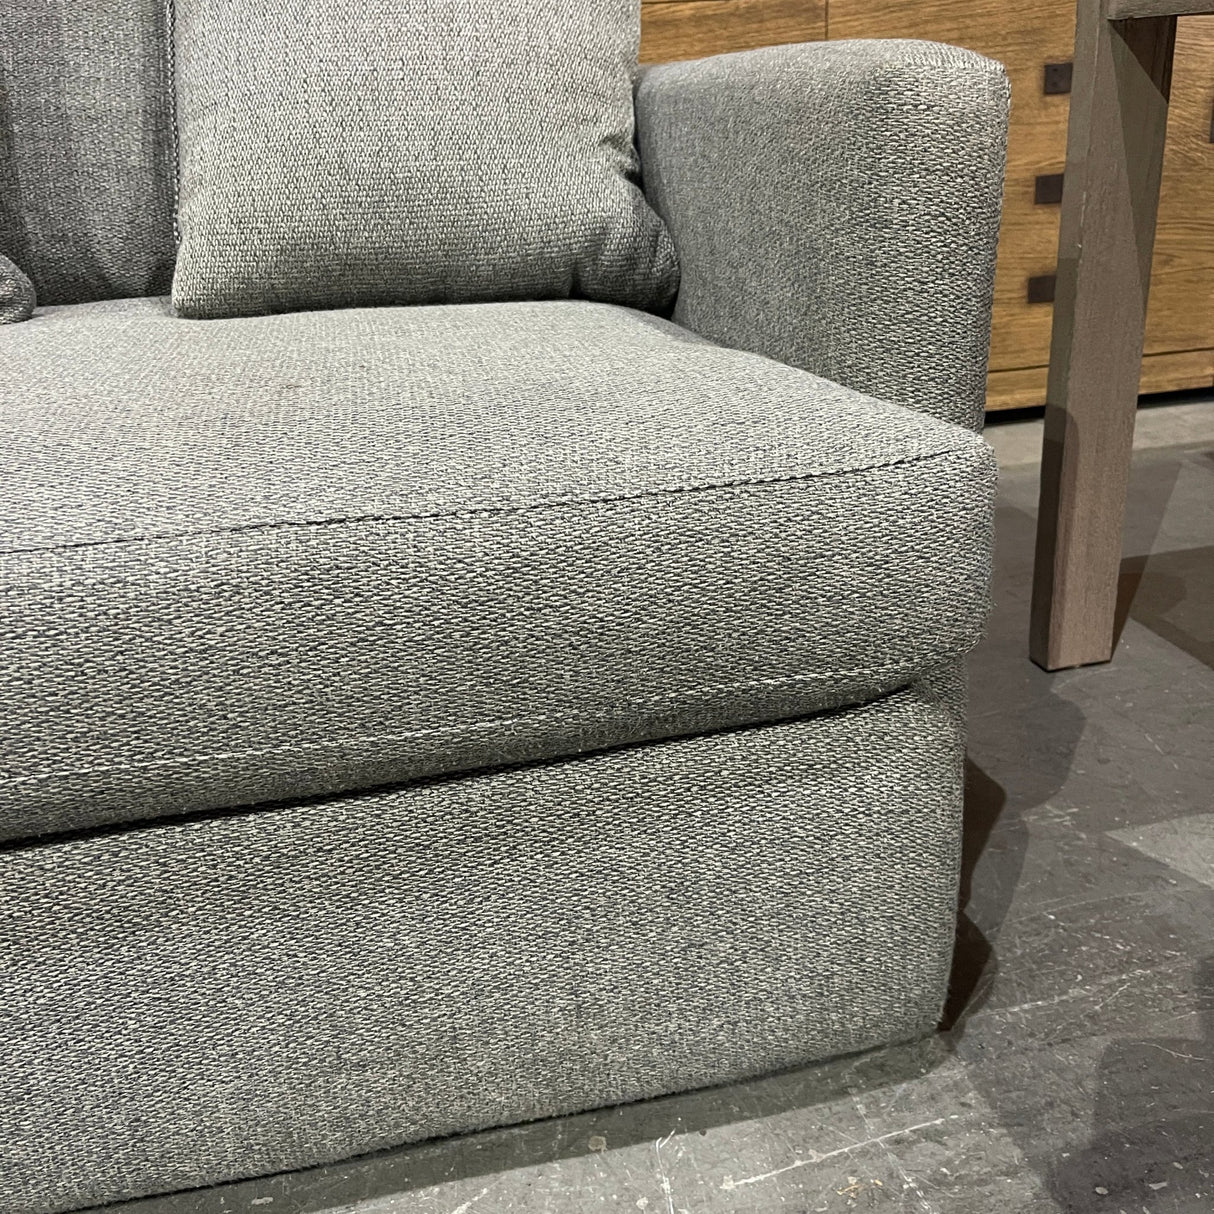 Lounge chair and ottoman - Crate & Barrel - enliven mart